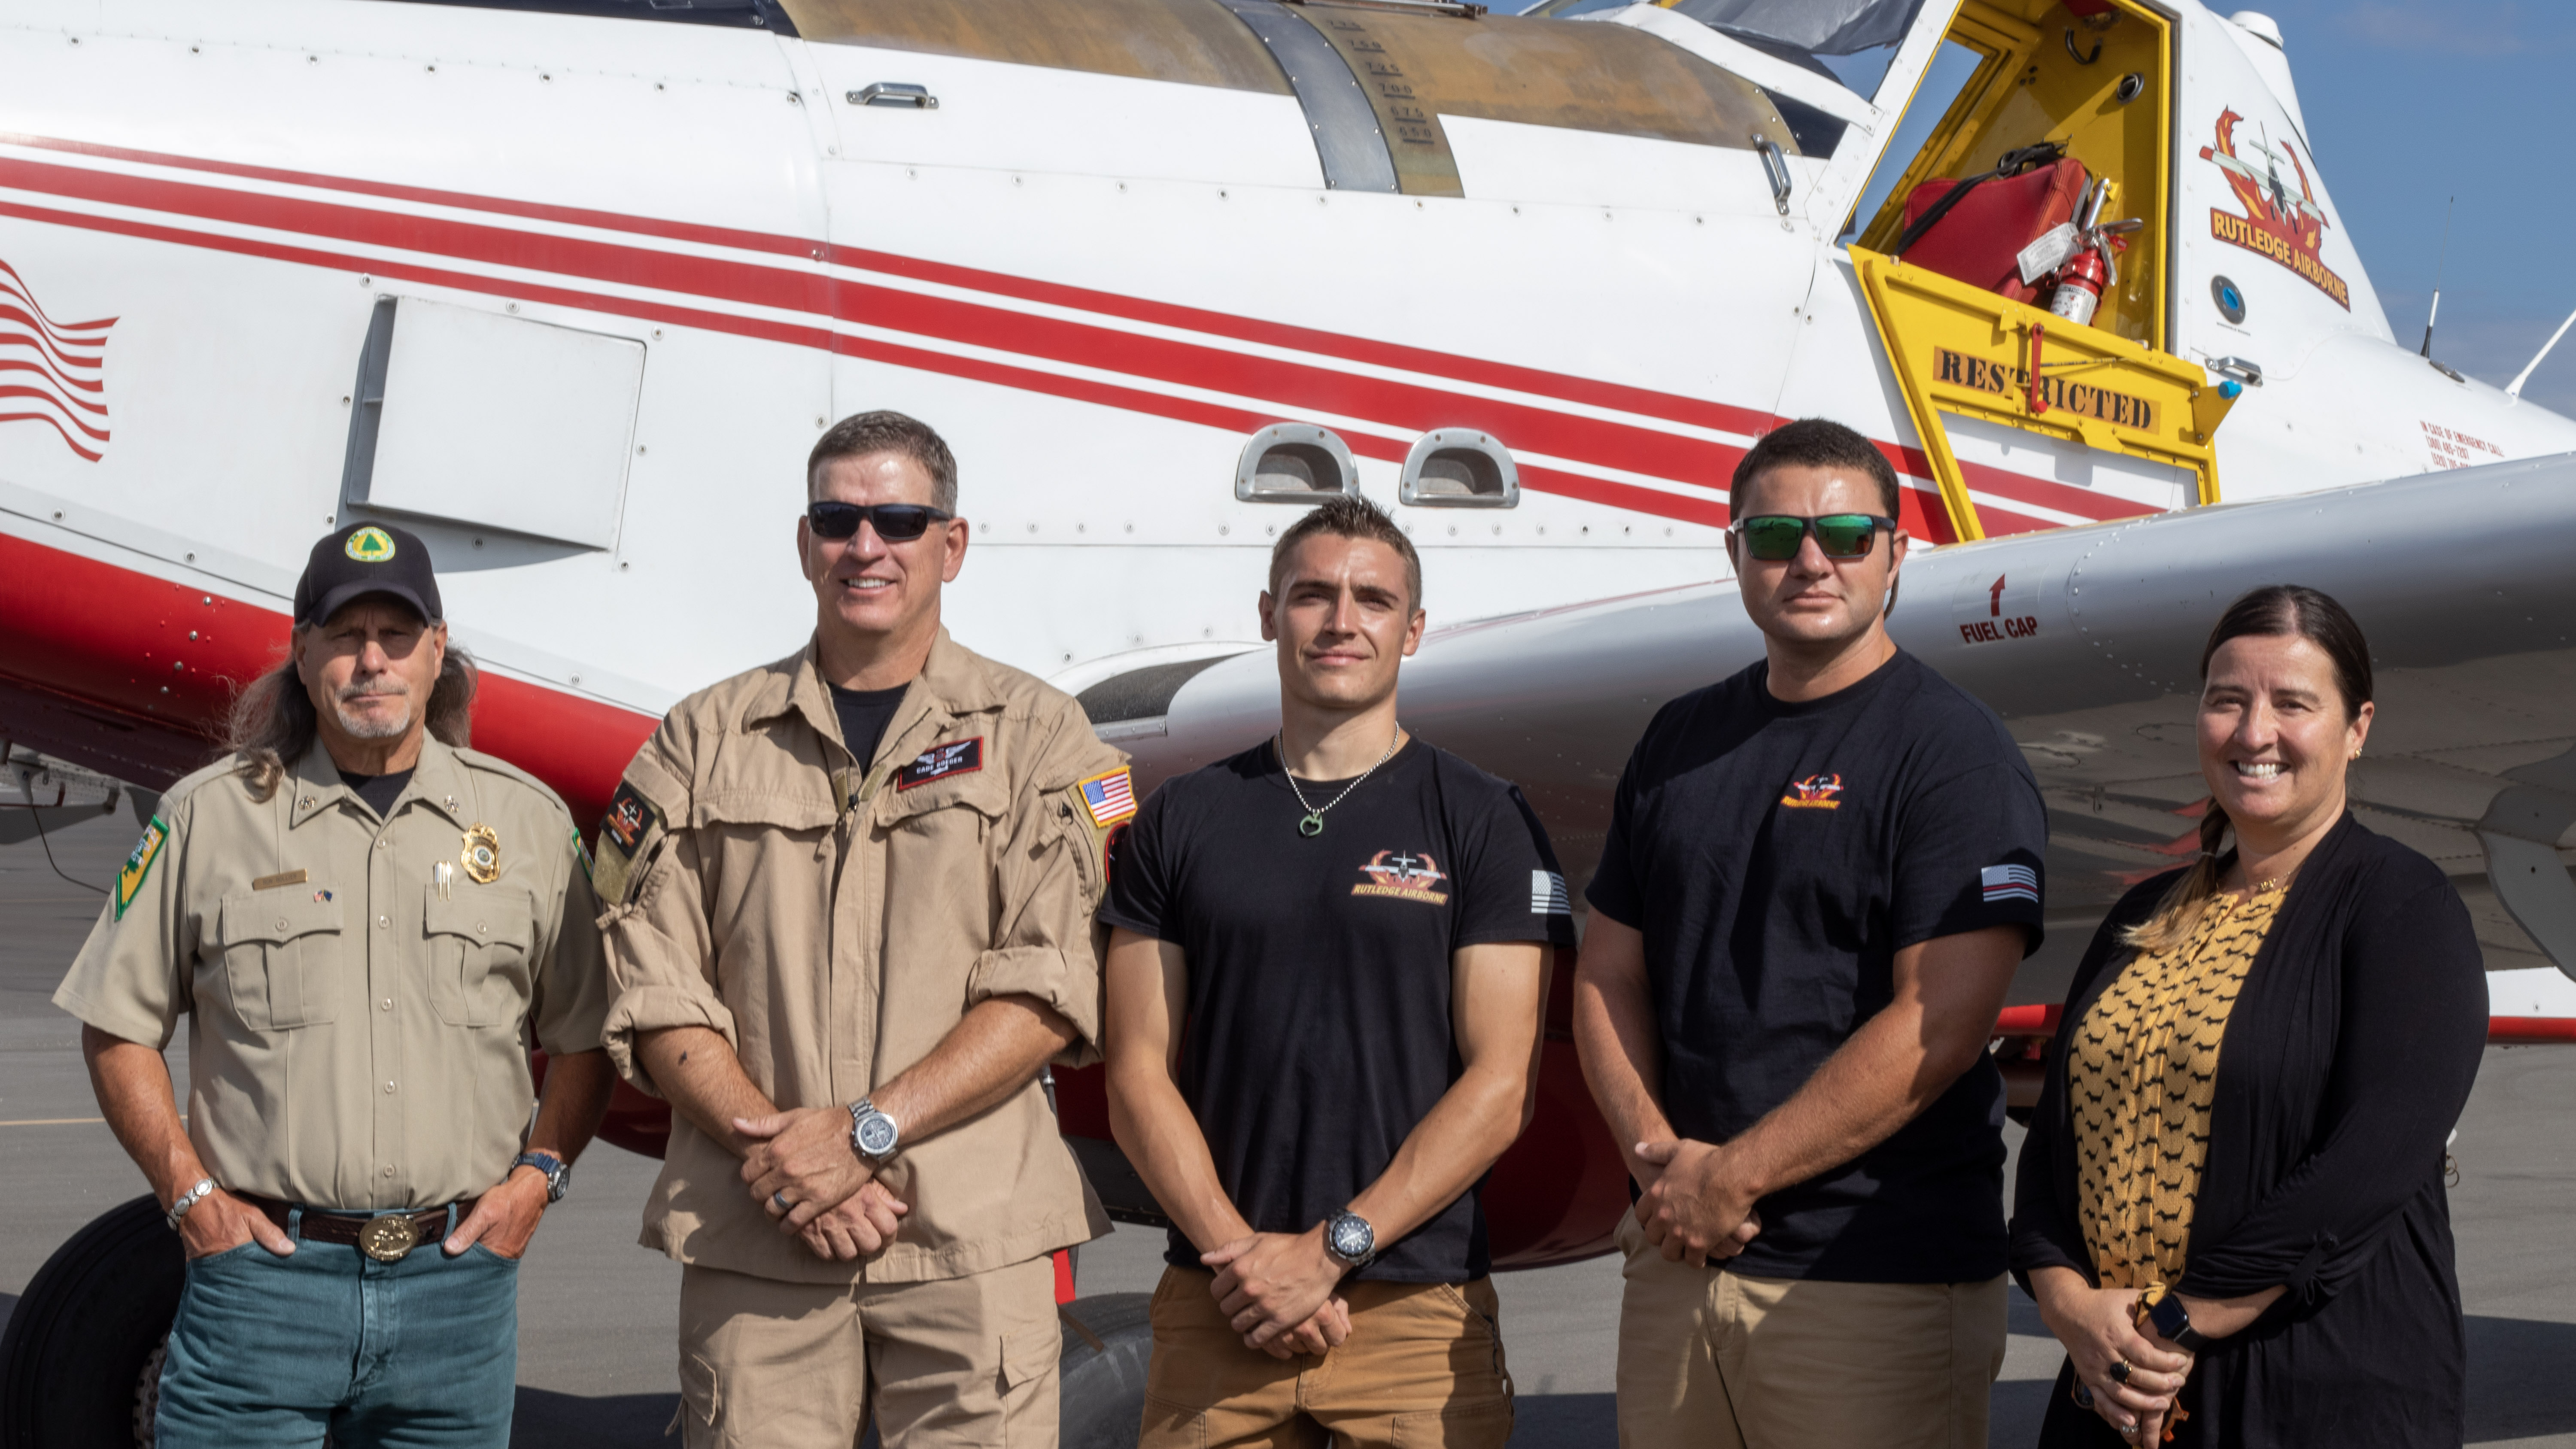 group photo of NDF and Rutledge Airborne Applications posing in front of an aircraft. From left to right, Ron Bollier, Cade Boeger, Wyatt Jourdain, Tanner Bowers, and State Forester Firewarden Kacey KC